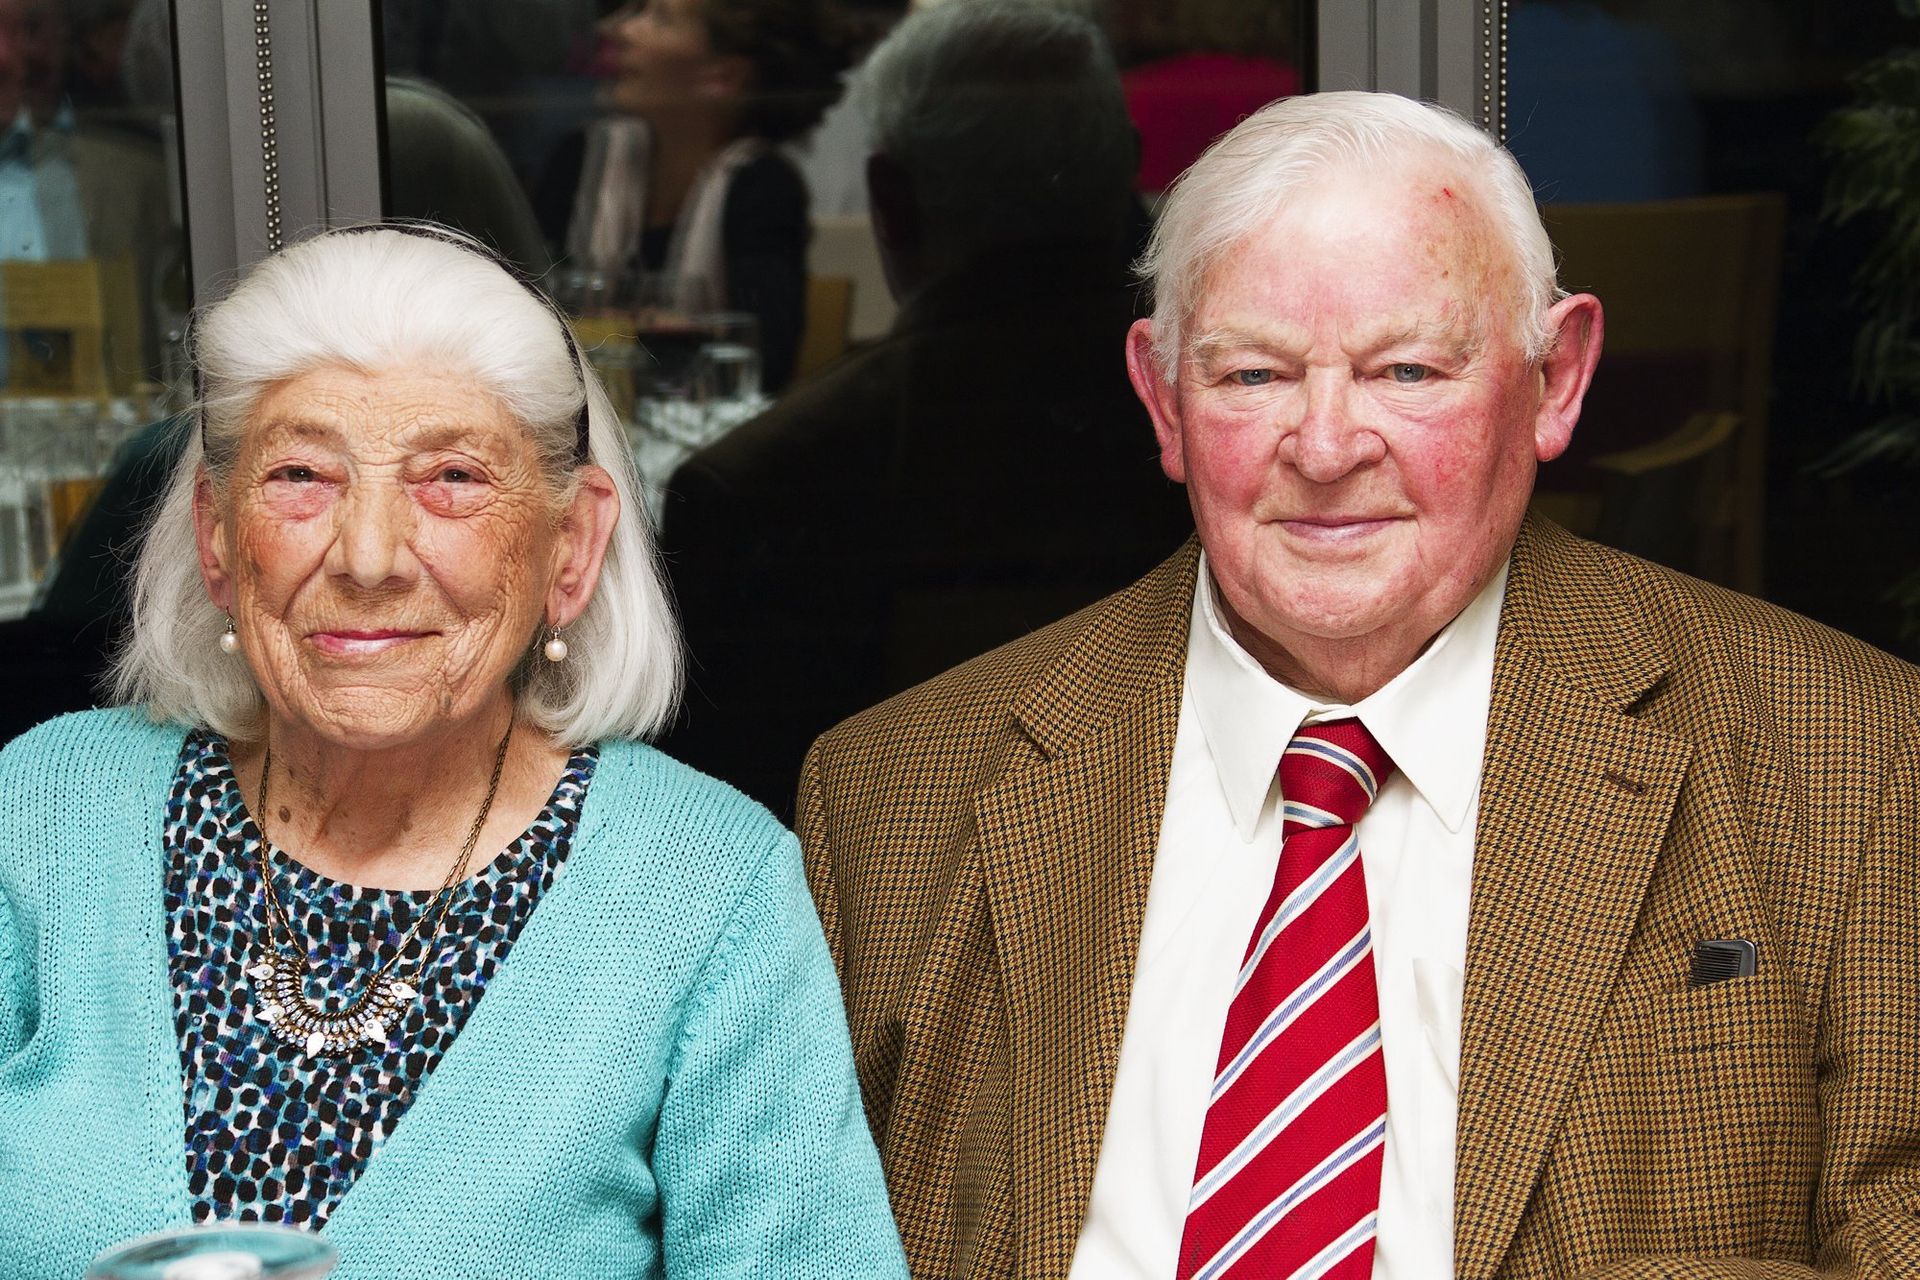 A man and a woman are sitting next to each other and smiling for the camera.